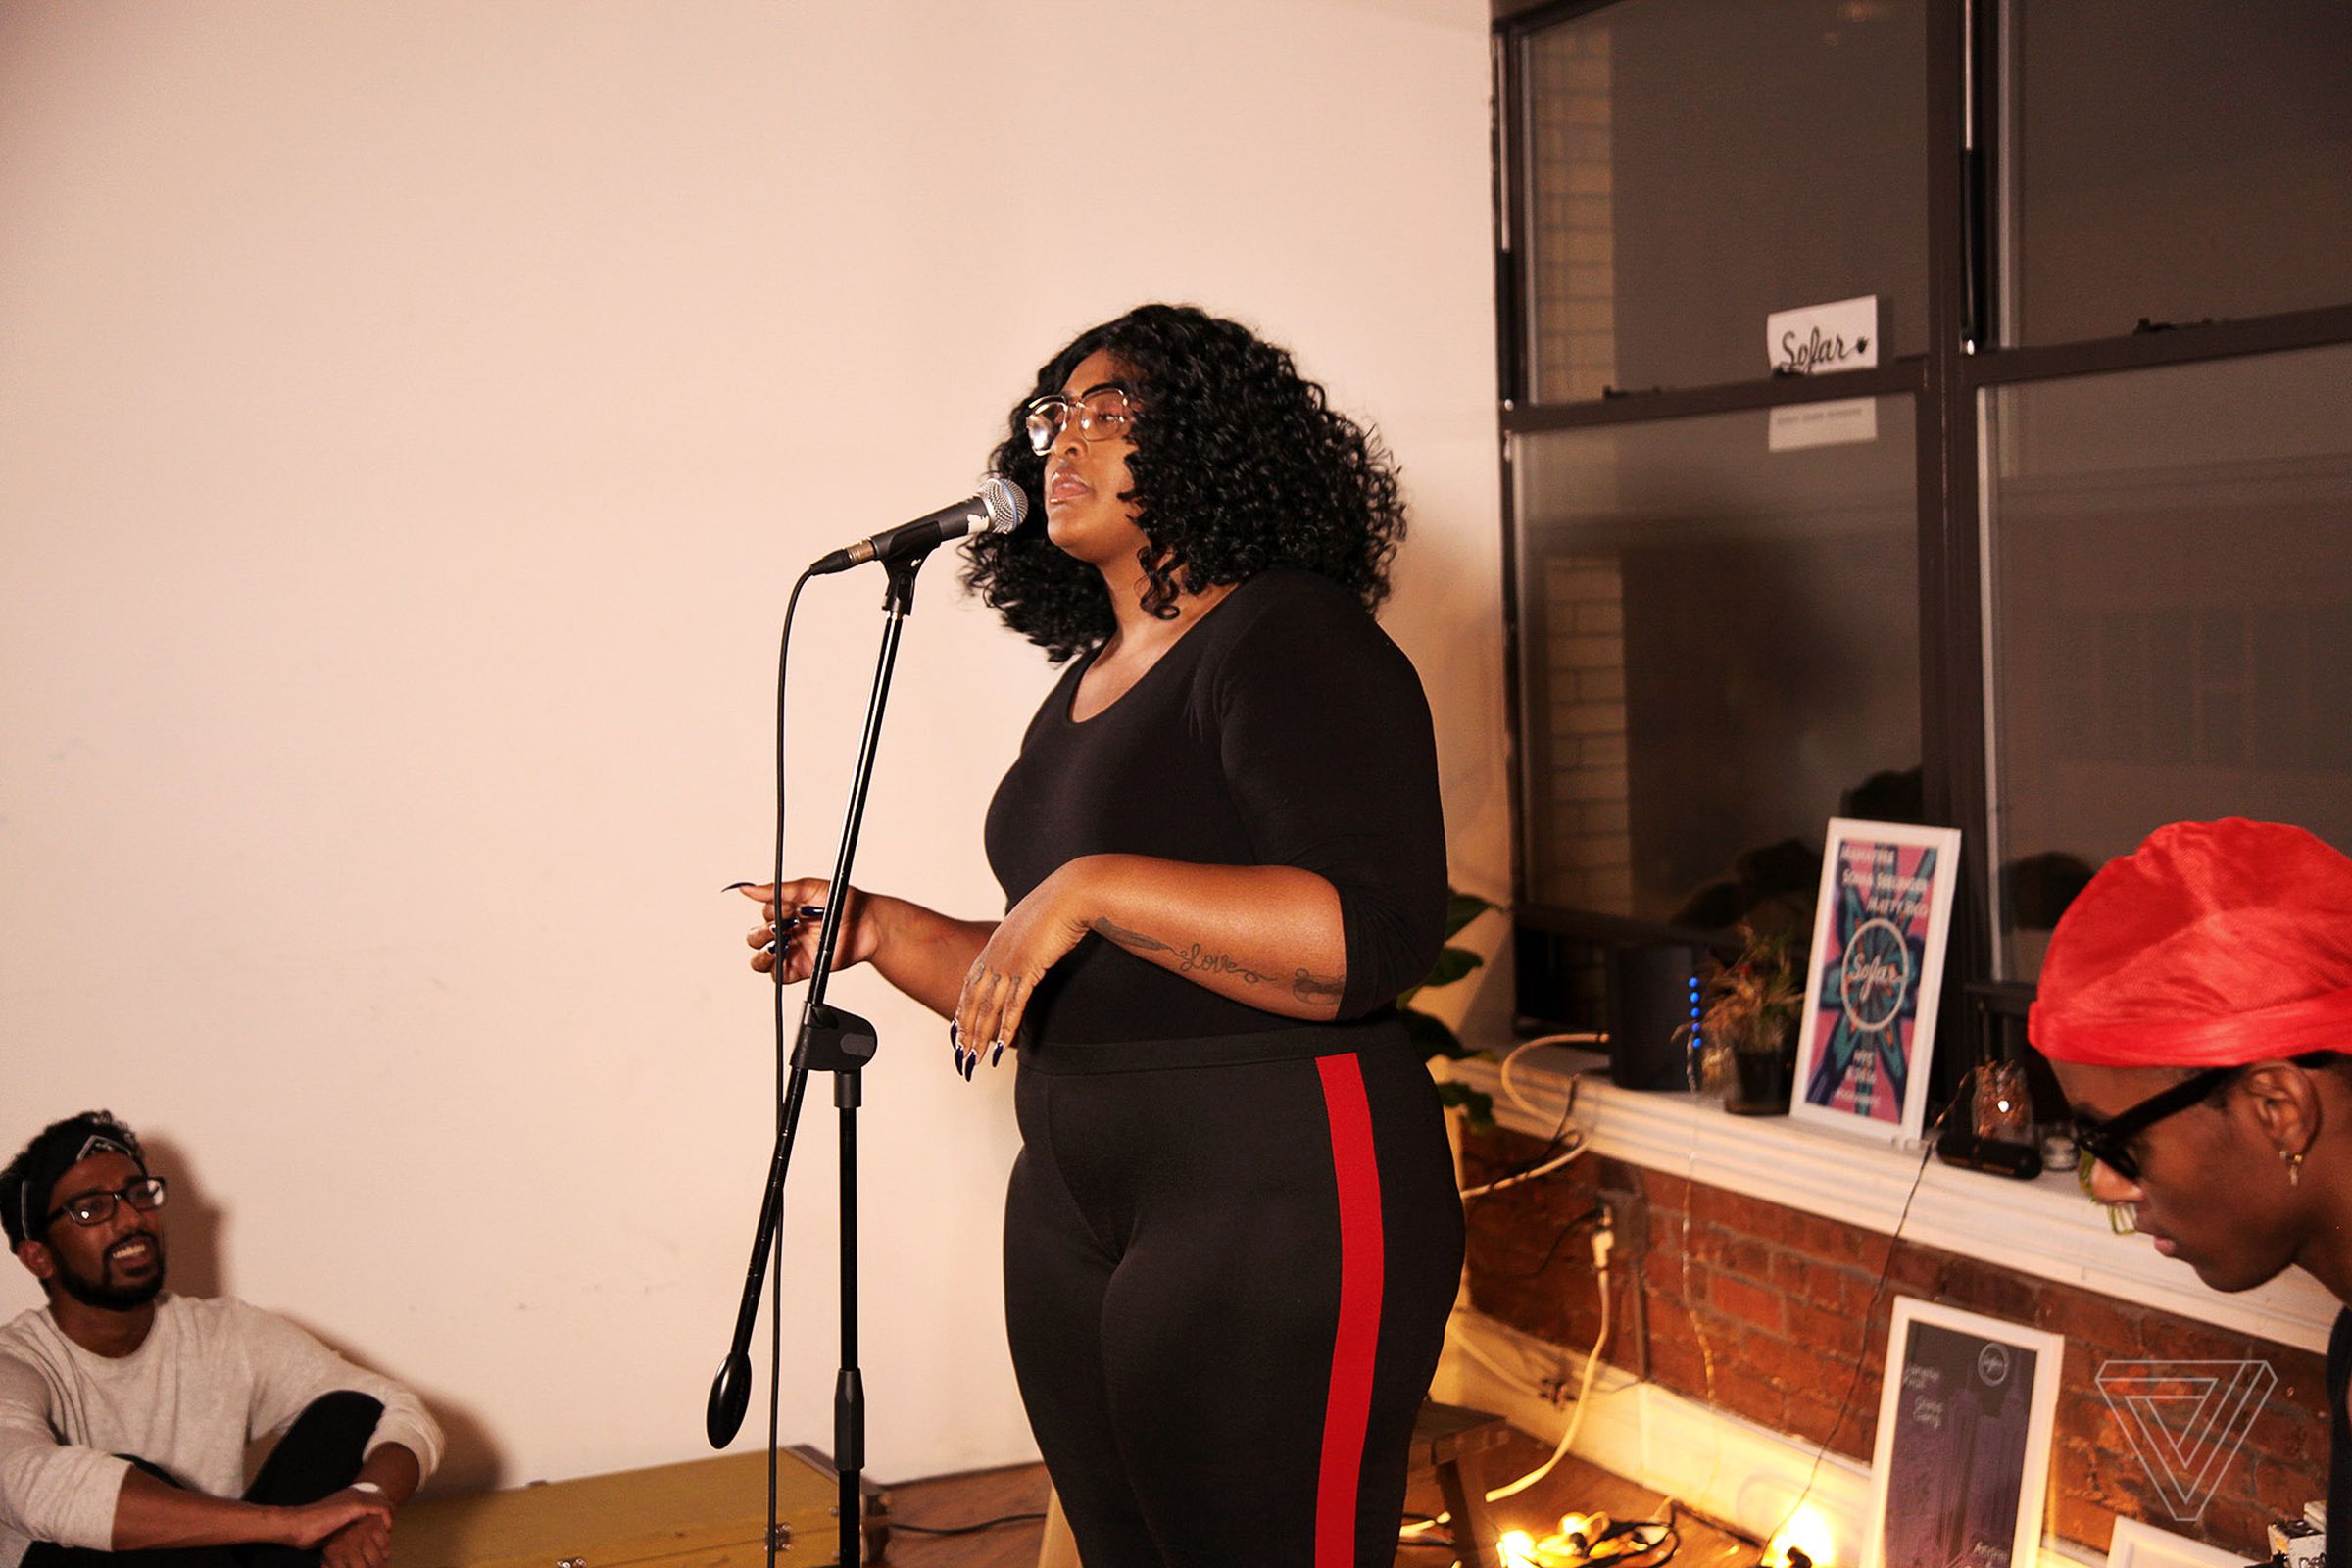 Rayana Jay at a SoFar Sounds show in Chinatown